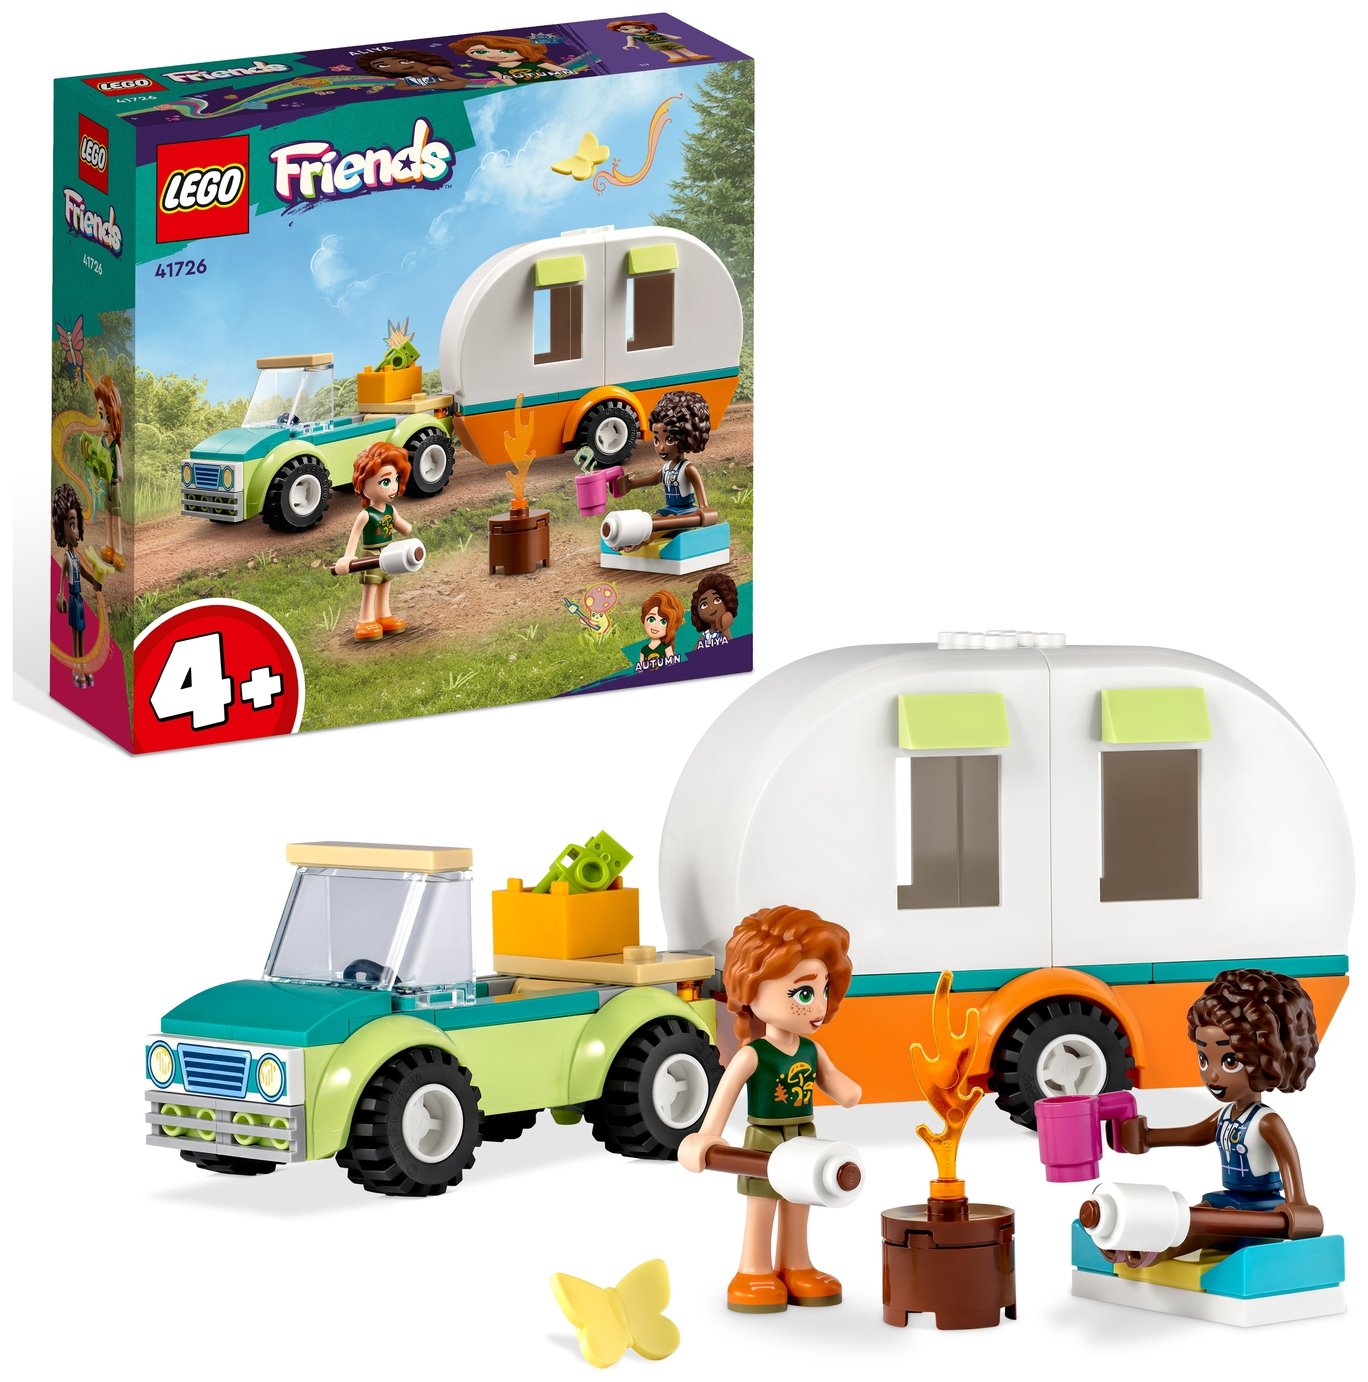 LEGO Friends Holiday Camping Trip Camper Van Toy Set 41726 review